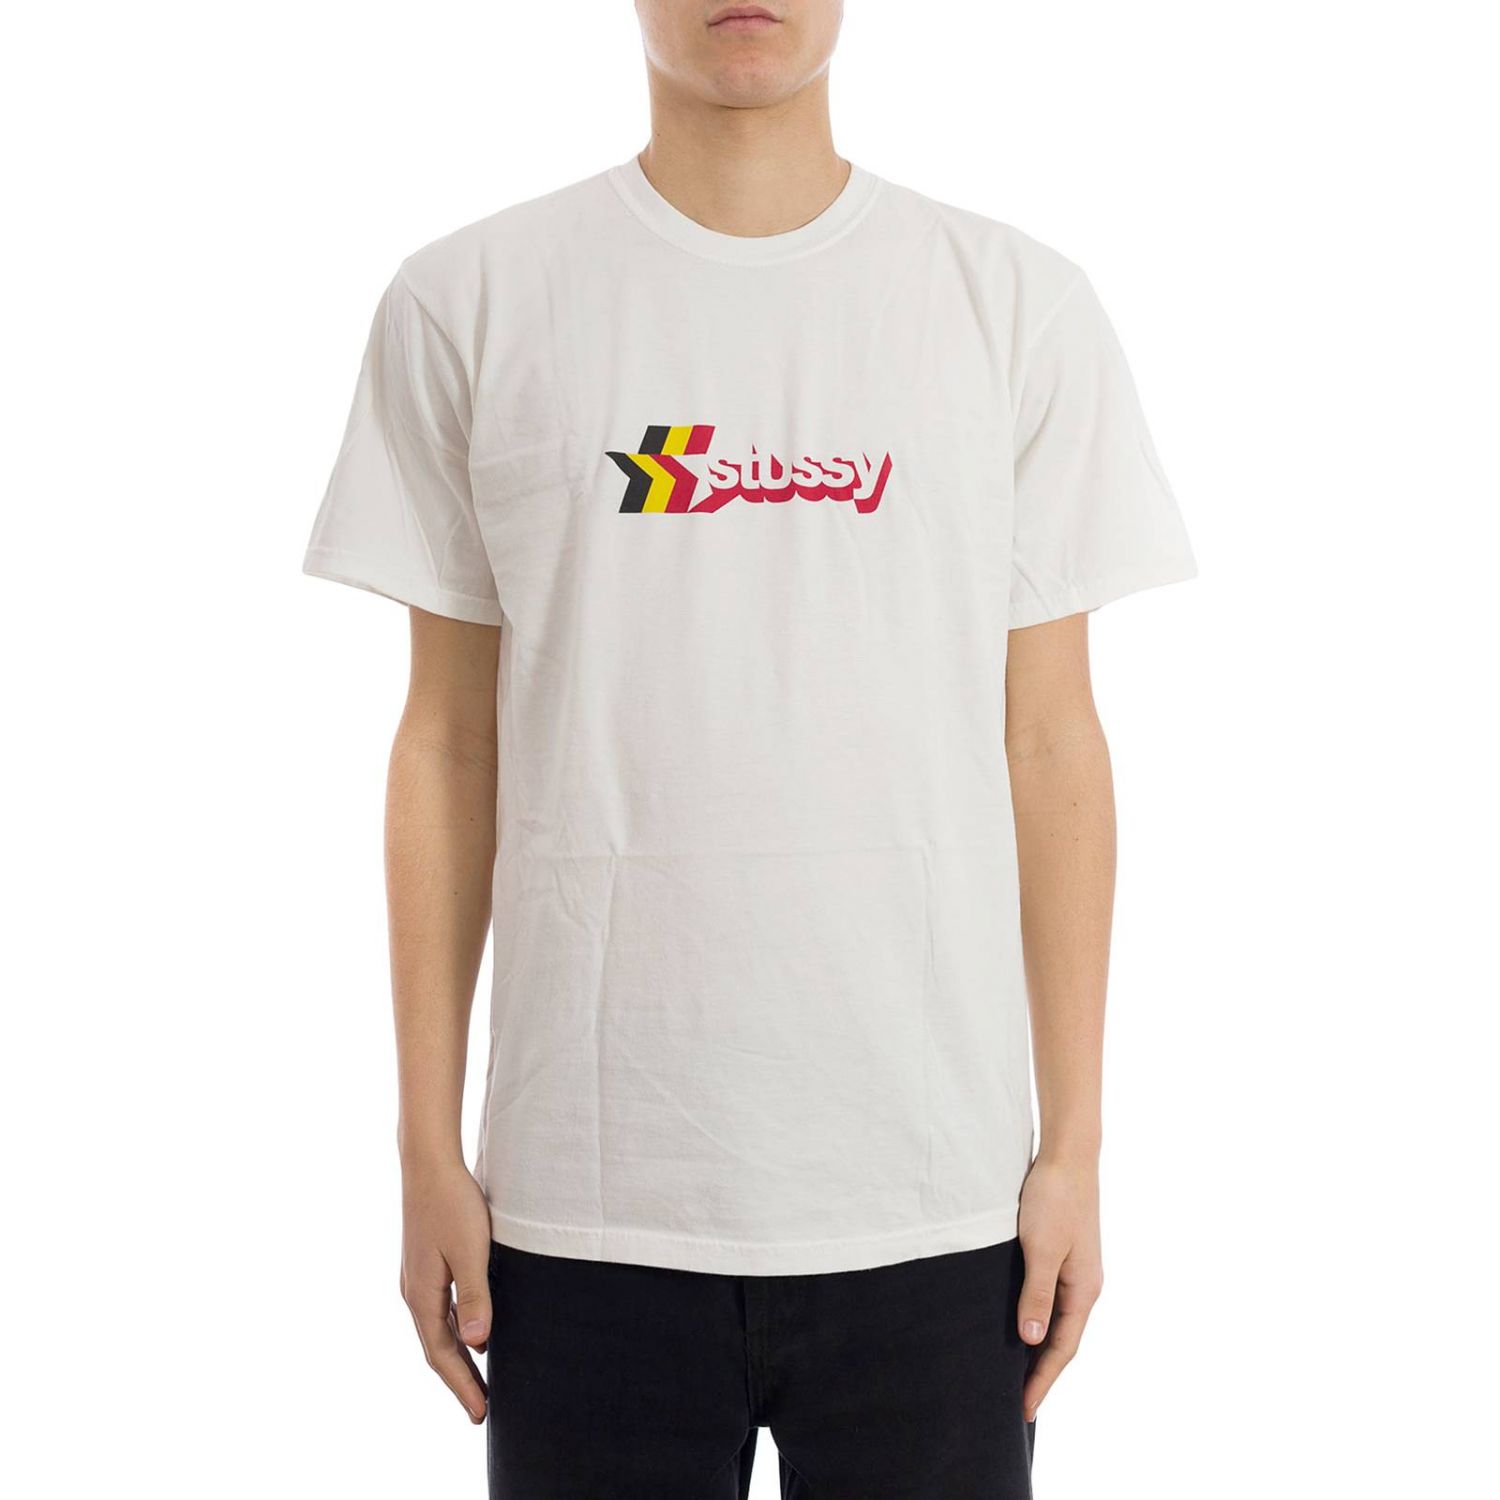 Stussy Outlet: t-shirt for man - White | Stussy t-shirt 1904352 online ...